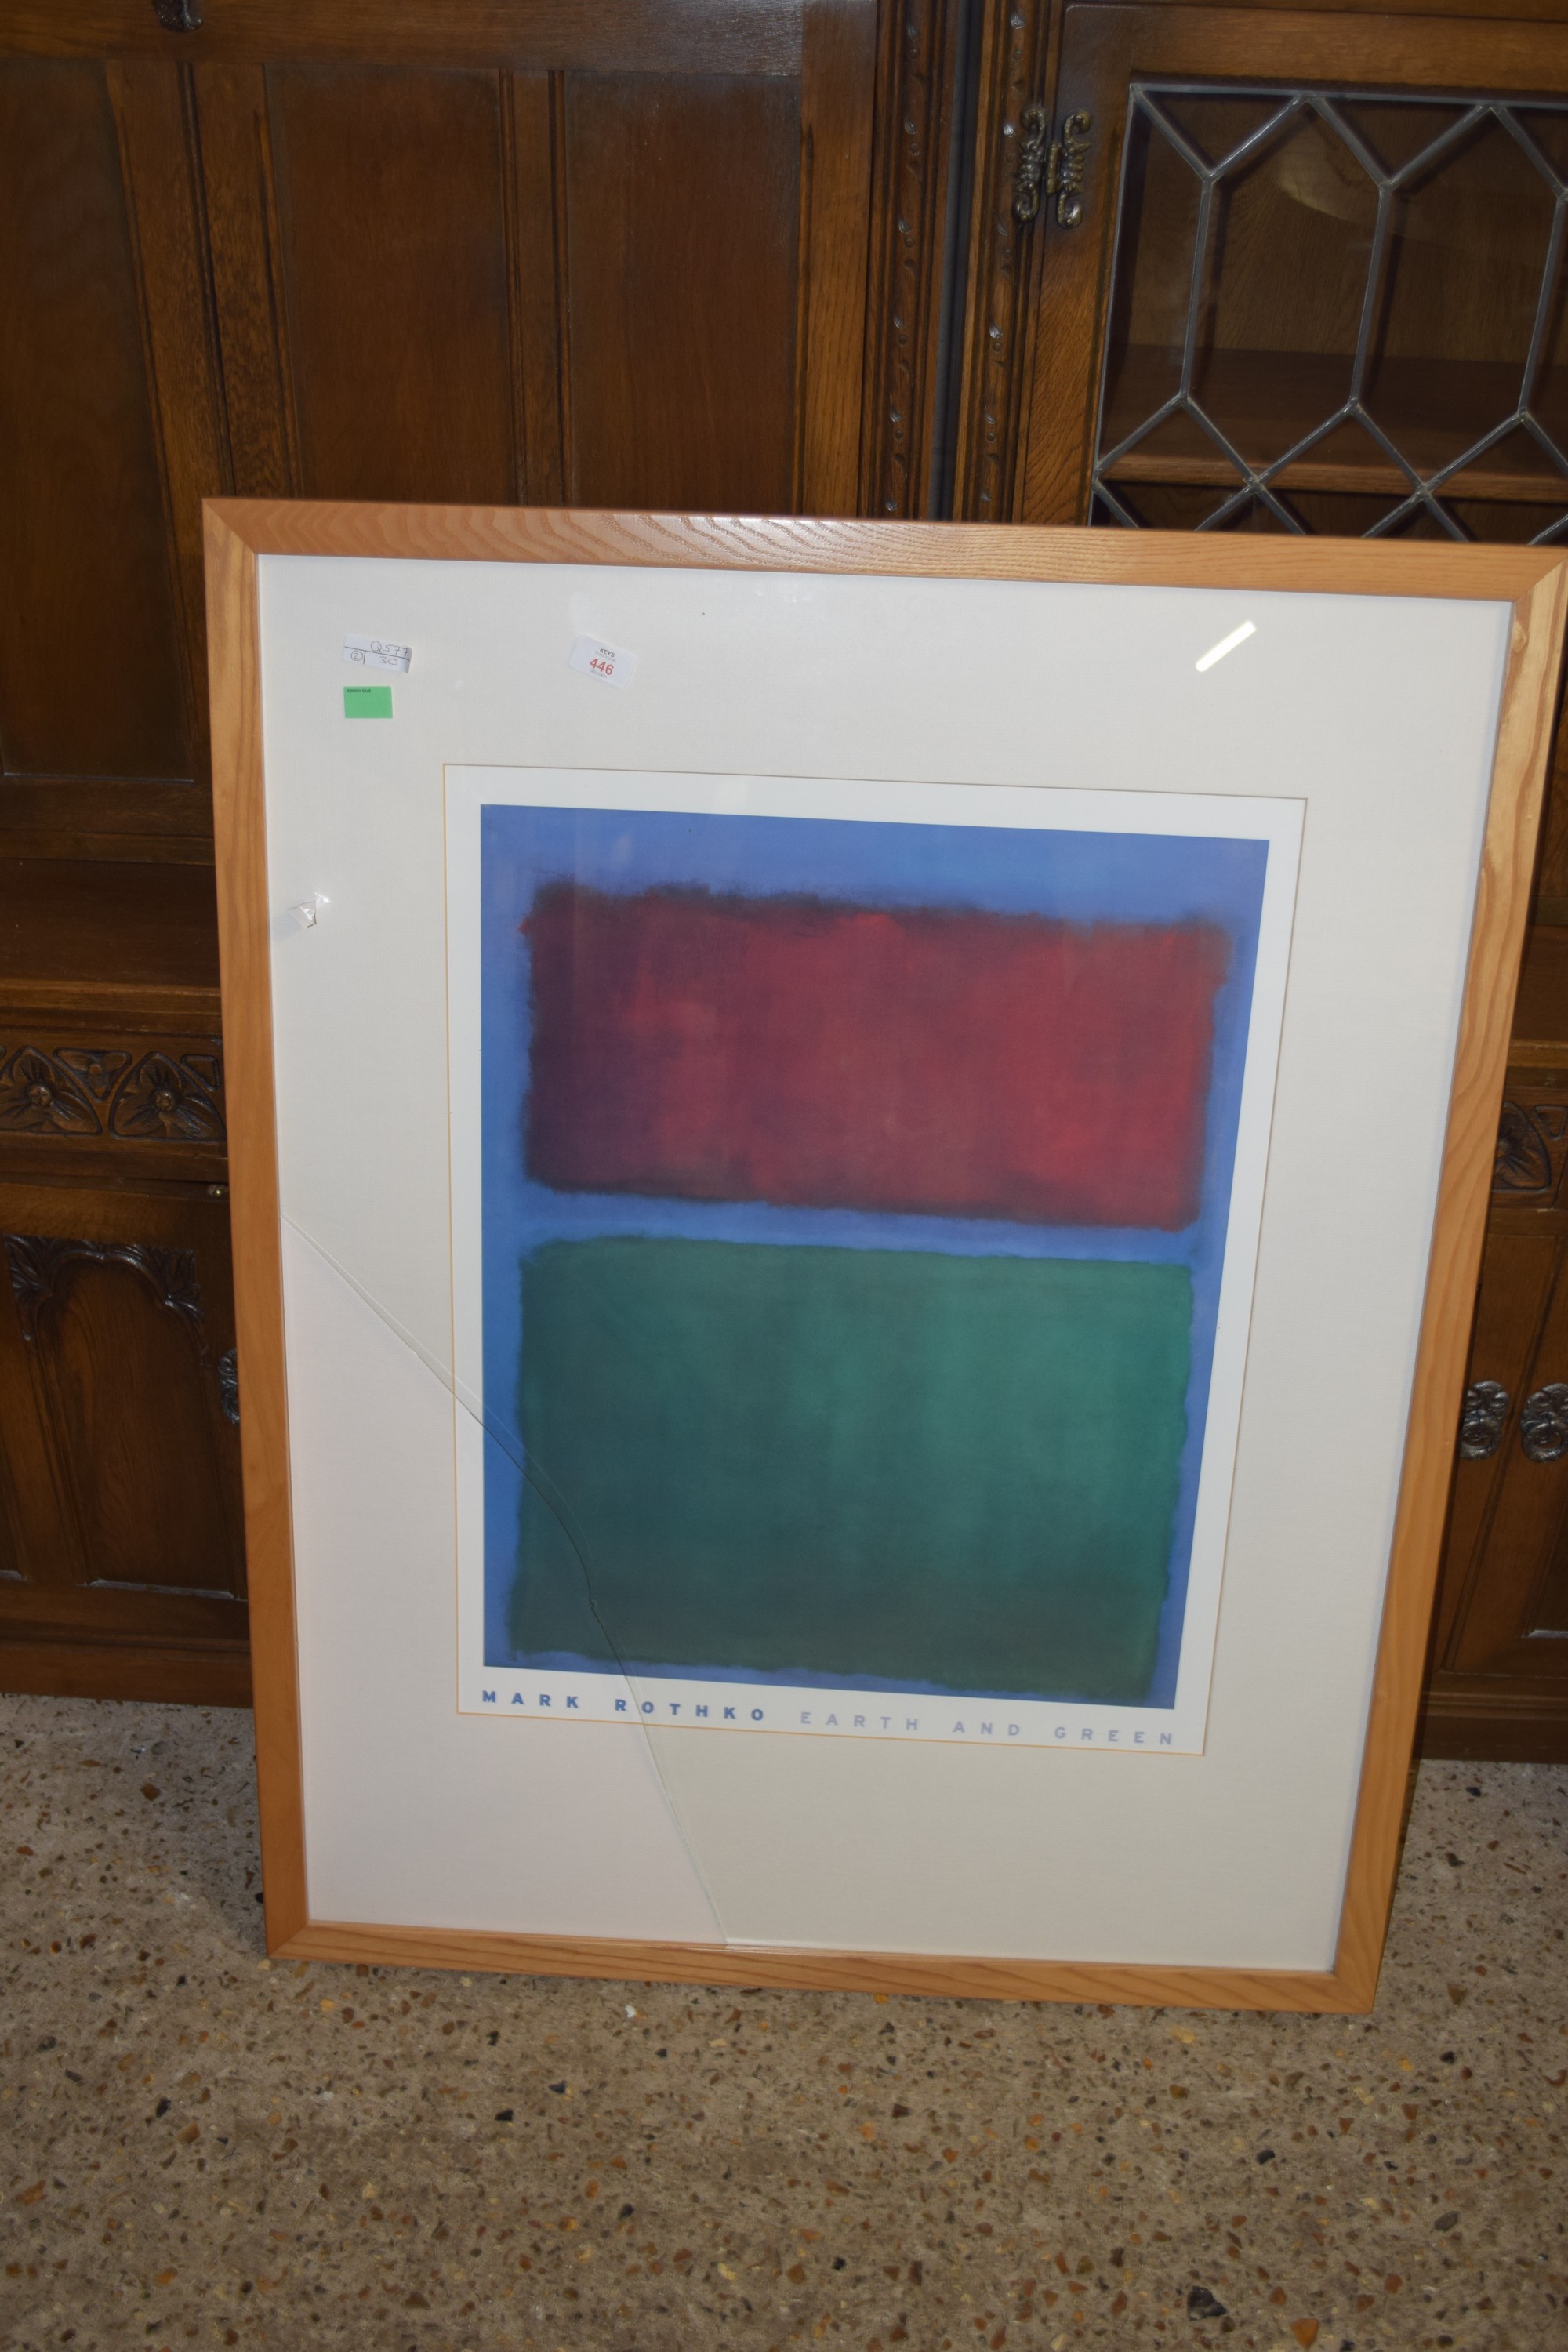 LARGE FRAMED POSTER PRINT "MARK ROTHKO - EARTH AND GREEN", FRAME WIDTH APPROX 84CM